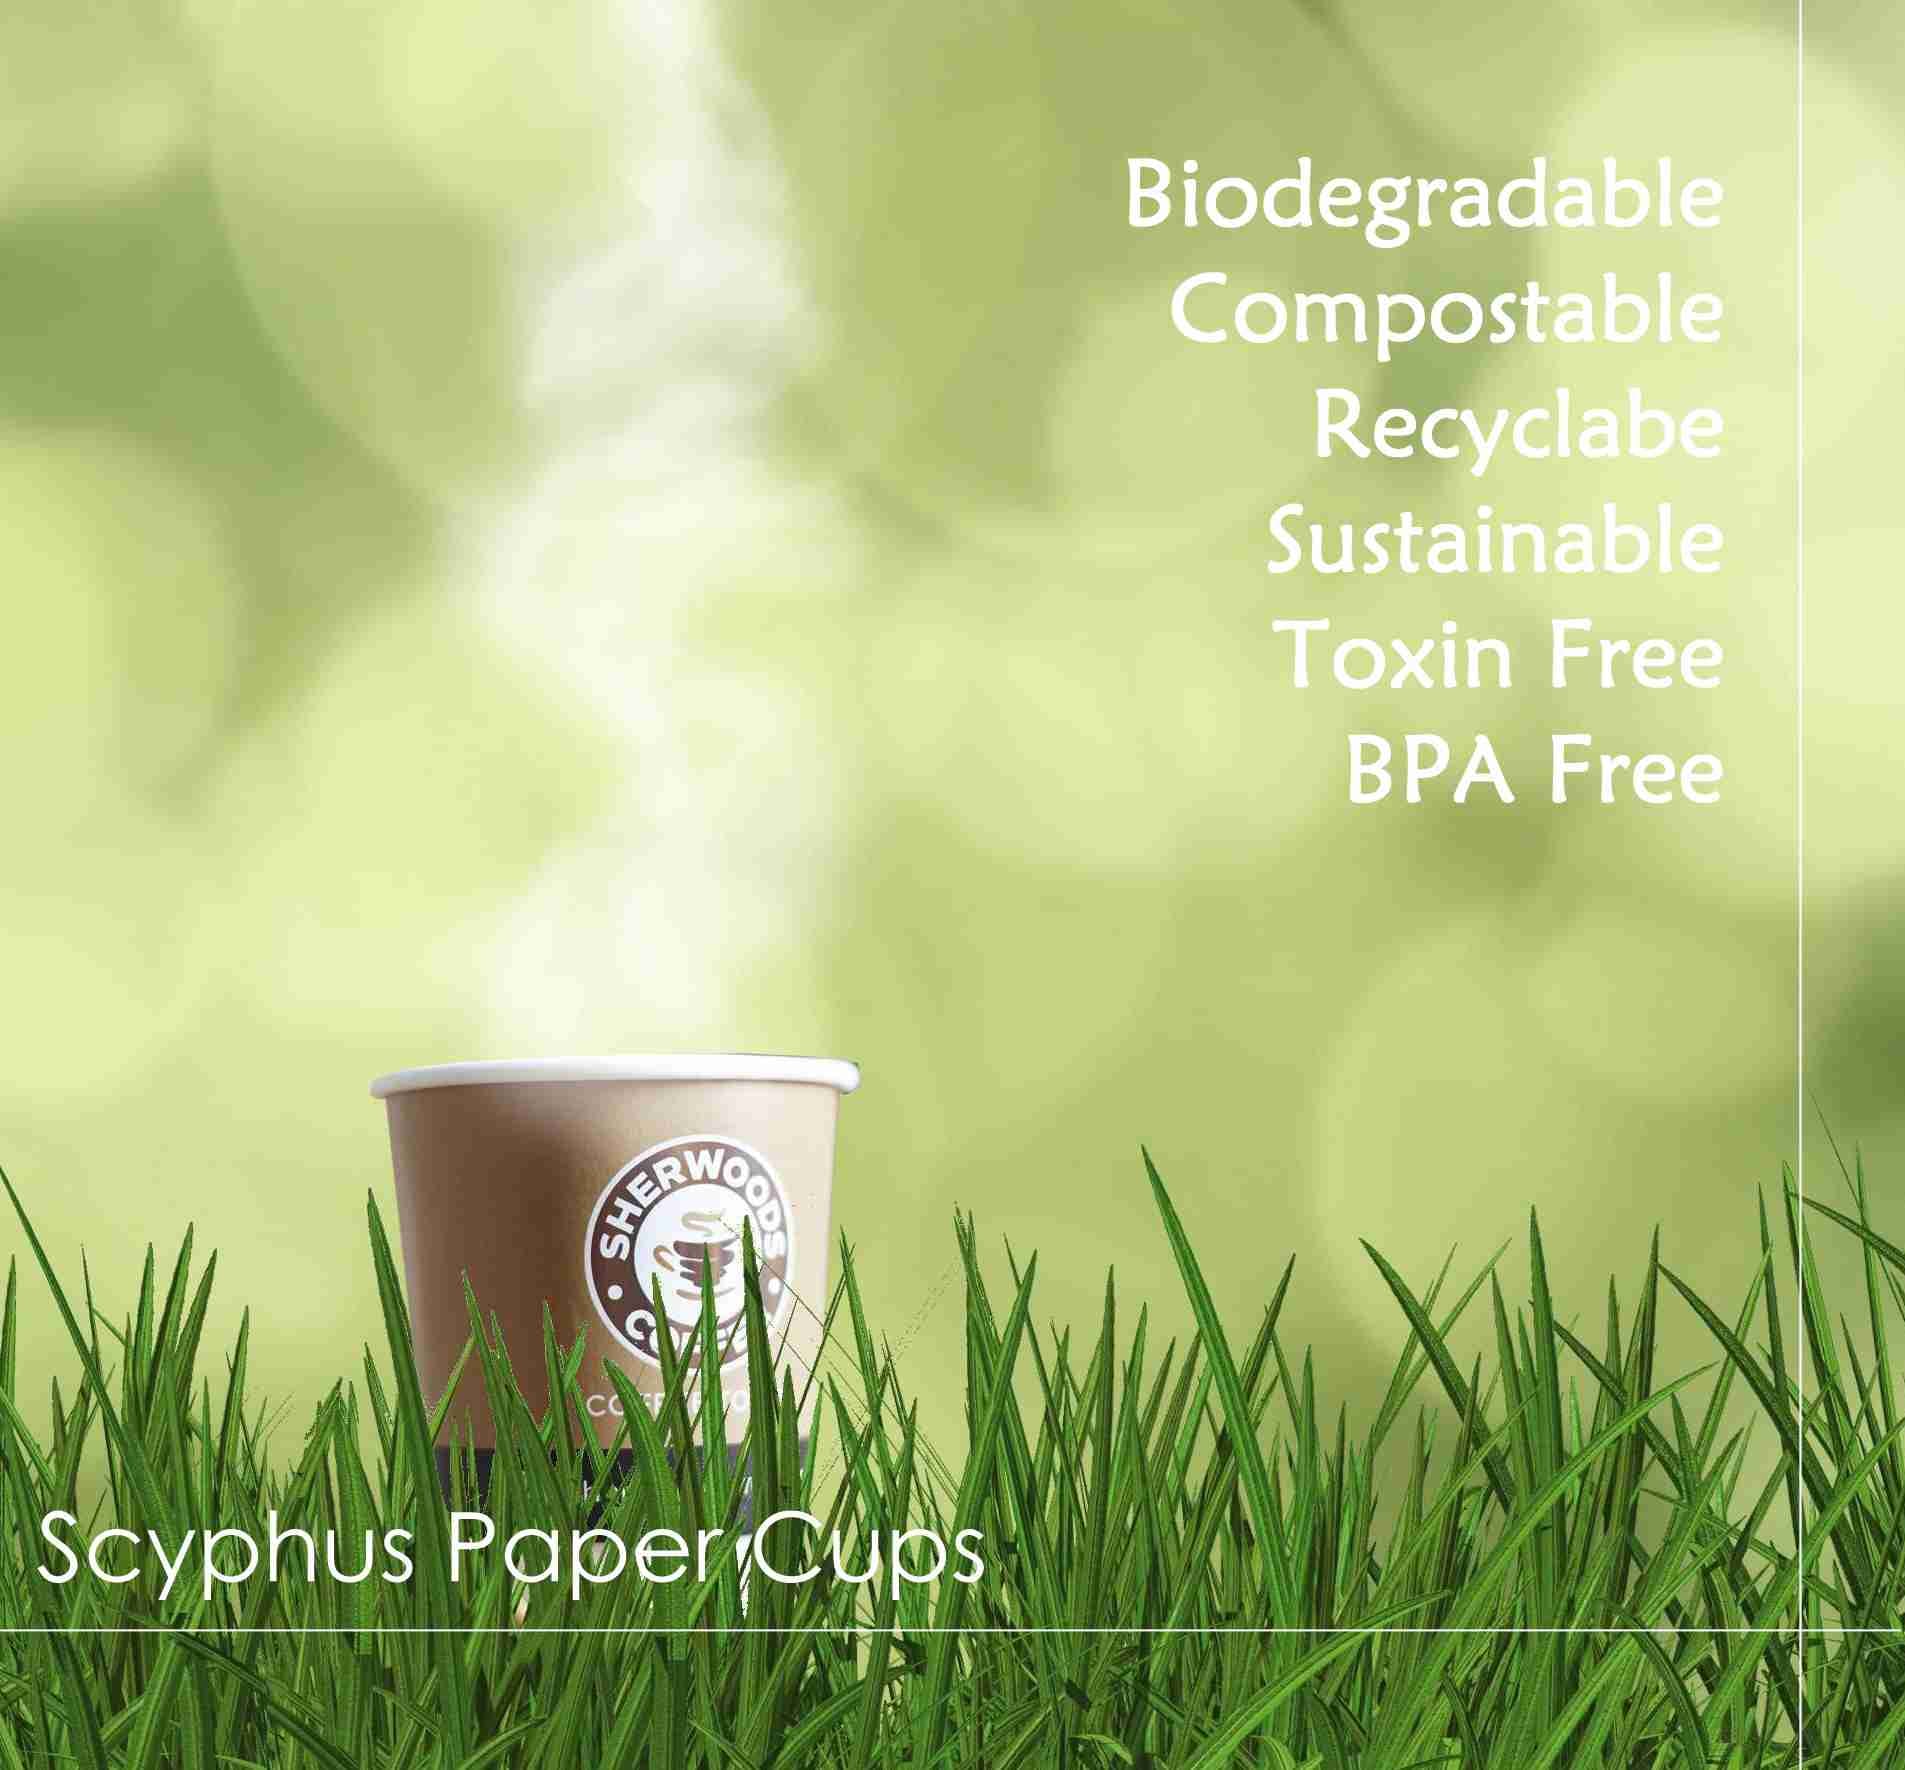 Home - Biodegradable Paper Cups